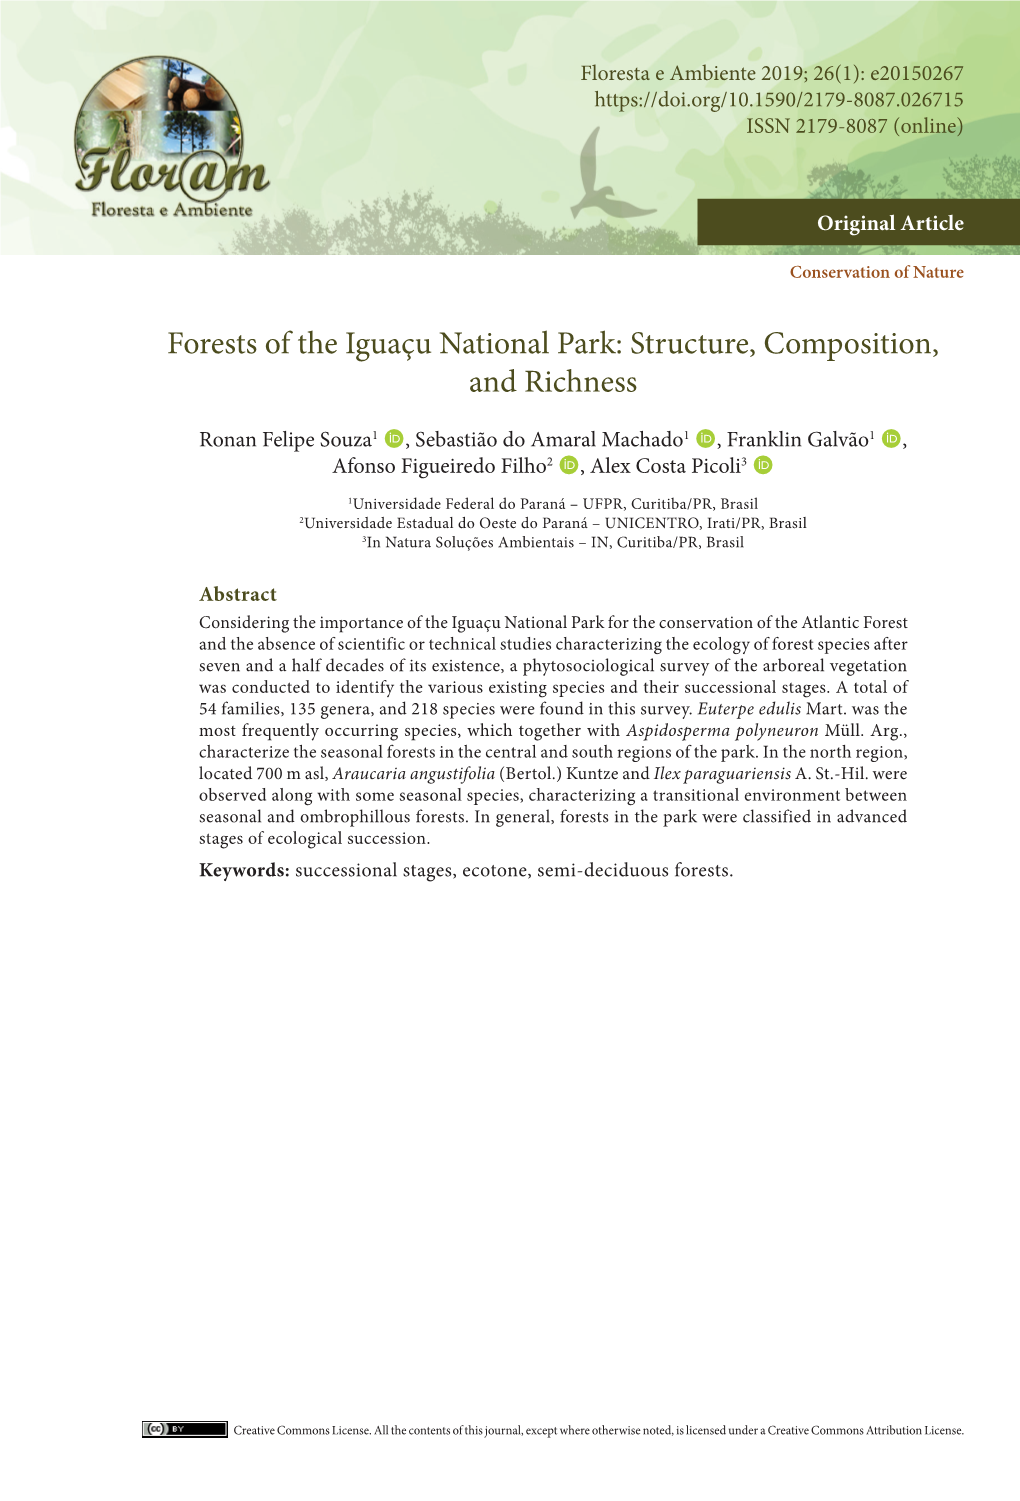 Forests of the Iguaçu National Park: Structure, Composition, and Richness